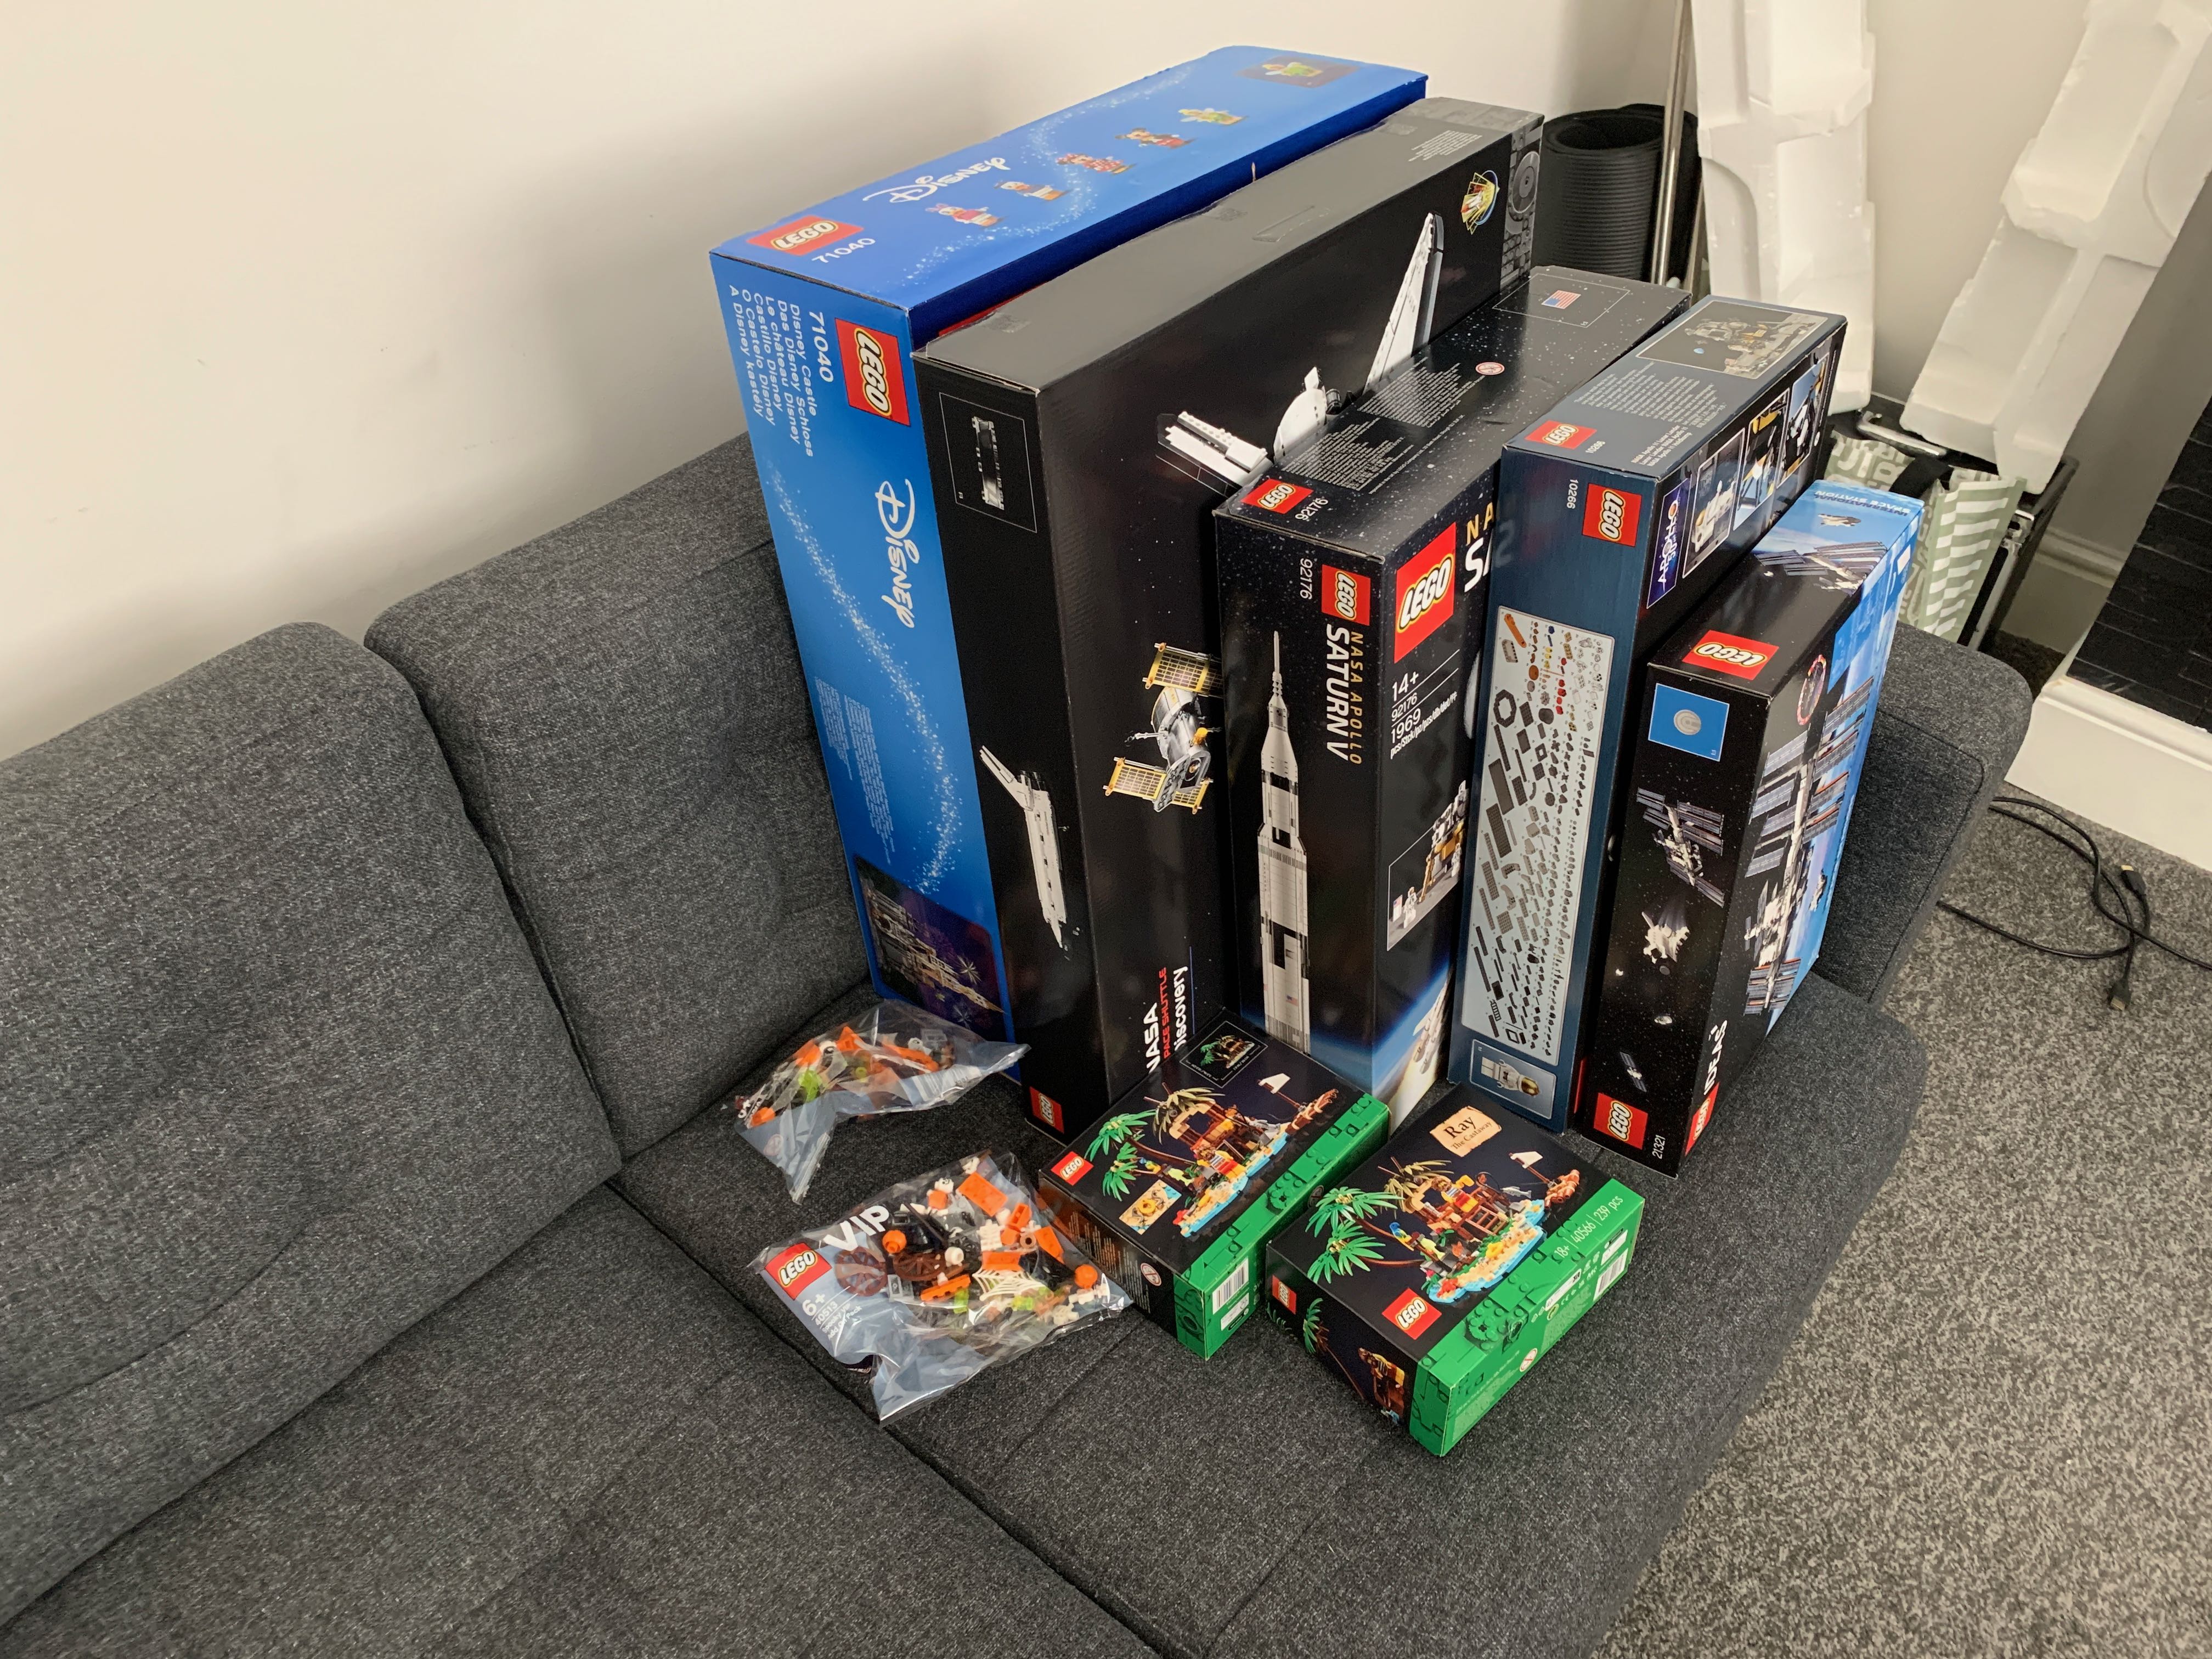 Lego Disney Castle, Space Shuttle Discovery, Saturn V, Apollo Lander, ISS boxes sat on a sofa 